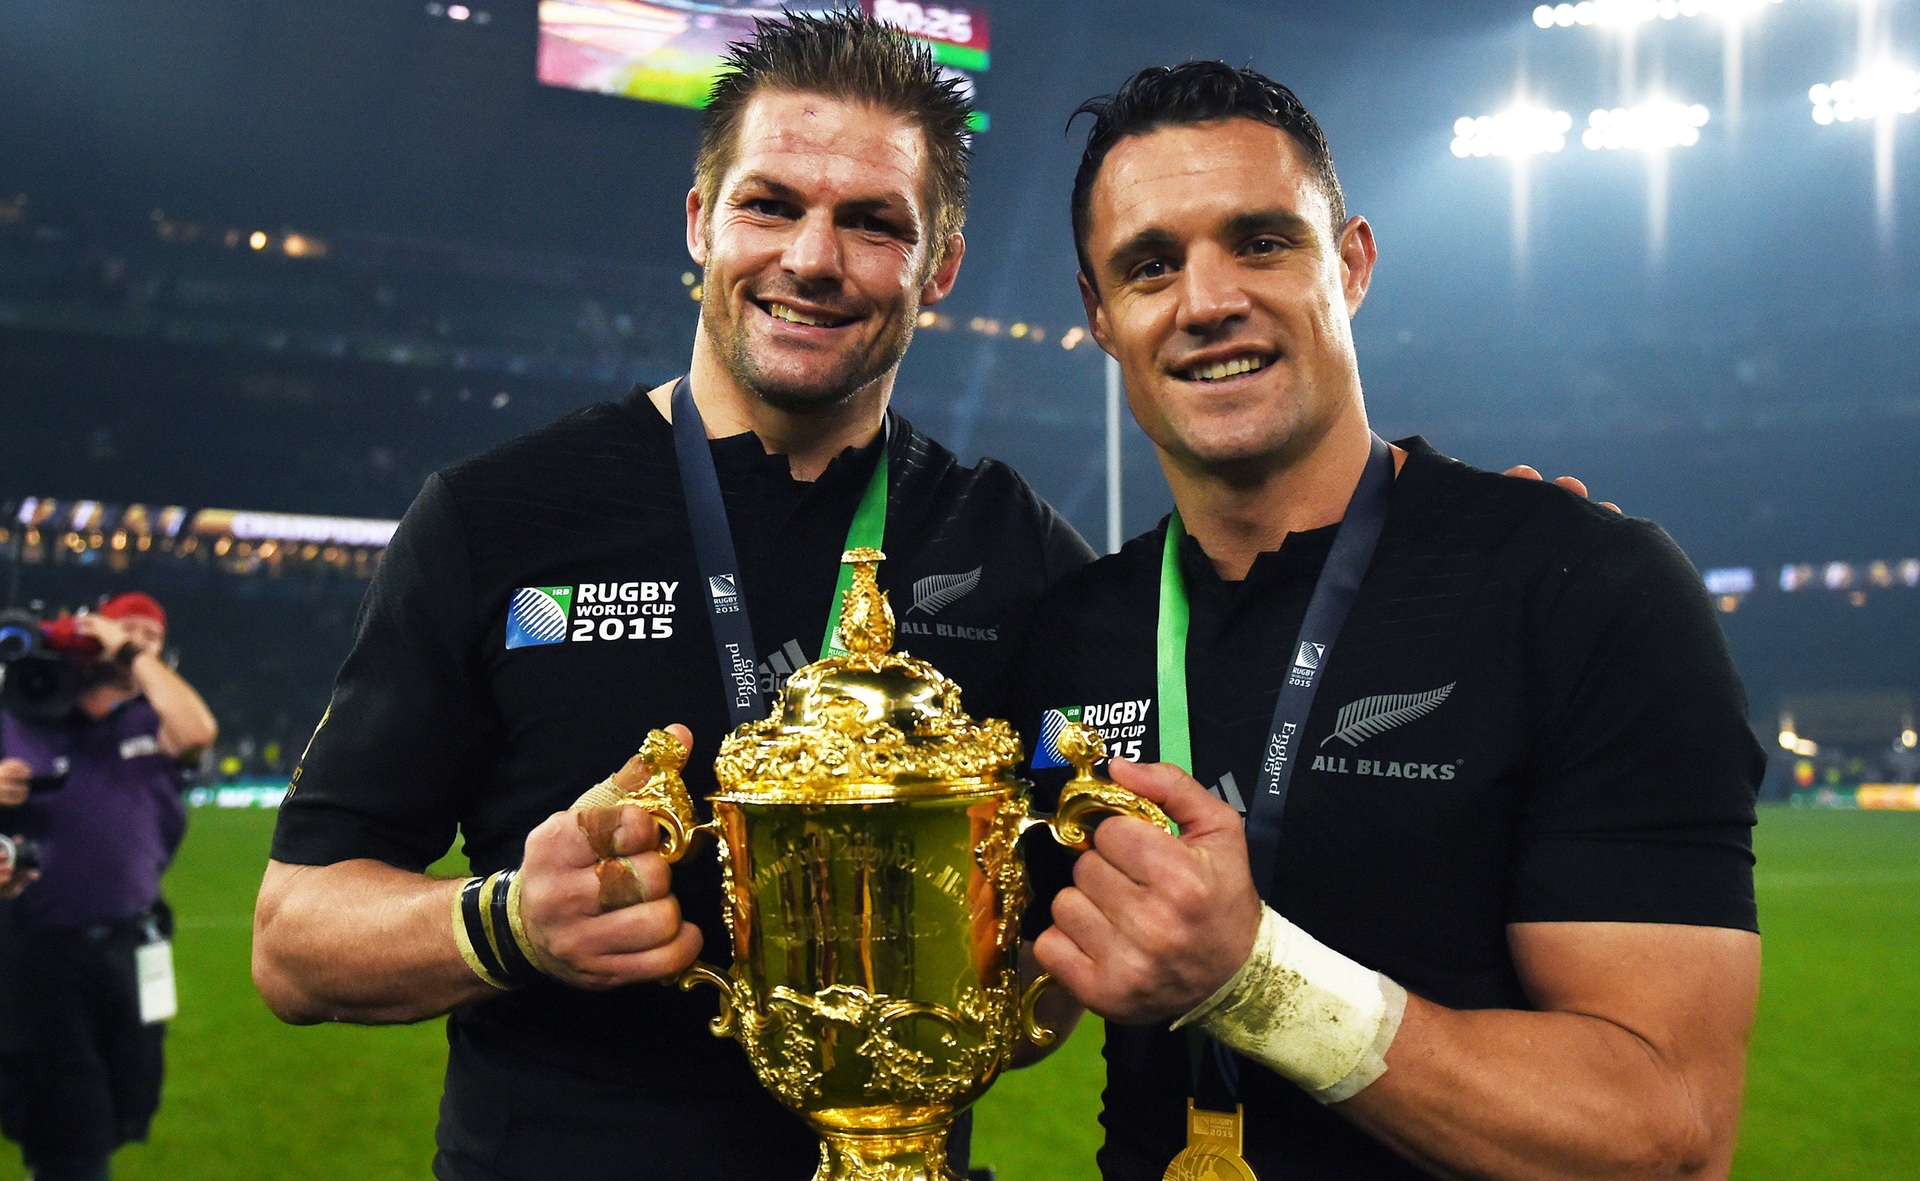 Dan Carter: 1598. A career celebration of the iconic All Black who